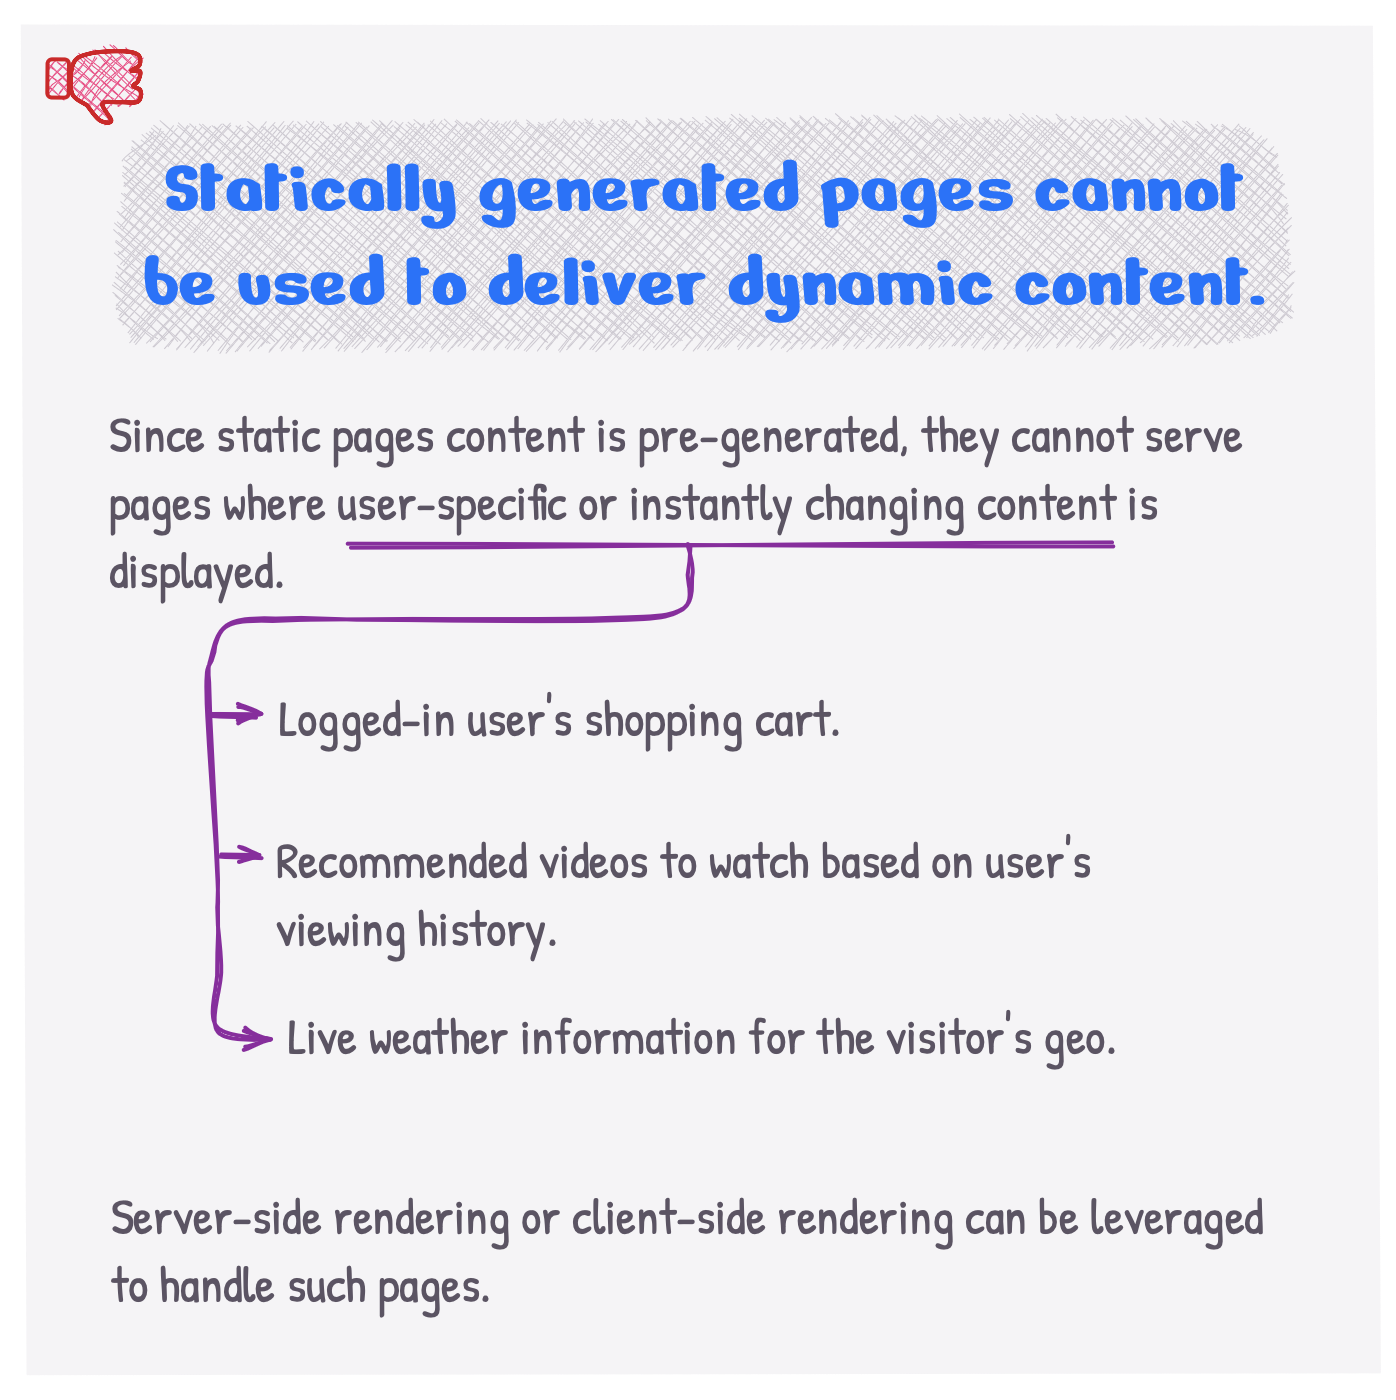 Limitations of statically generated pages